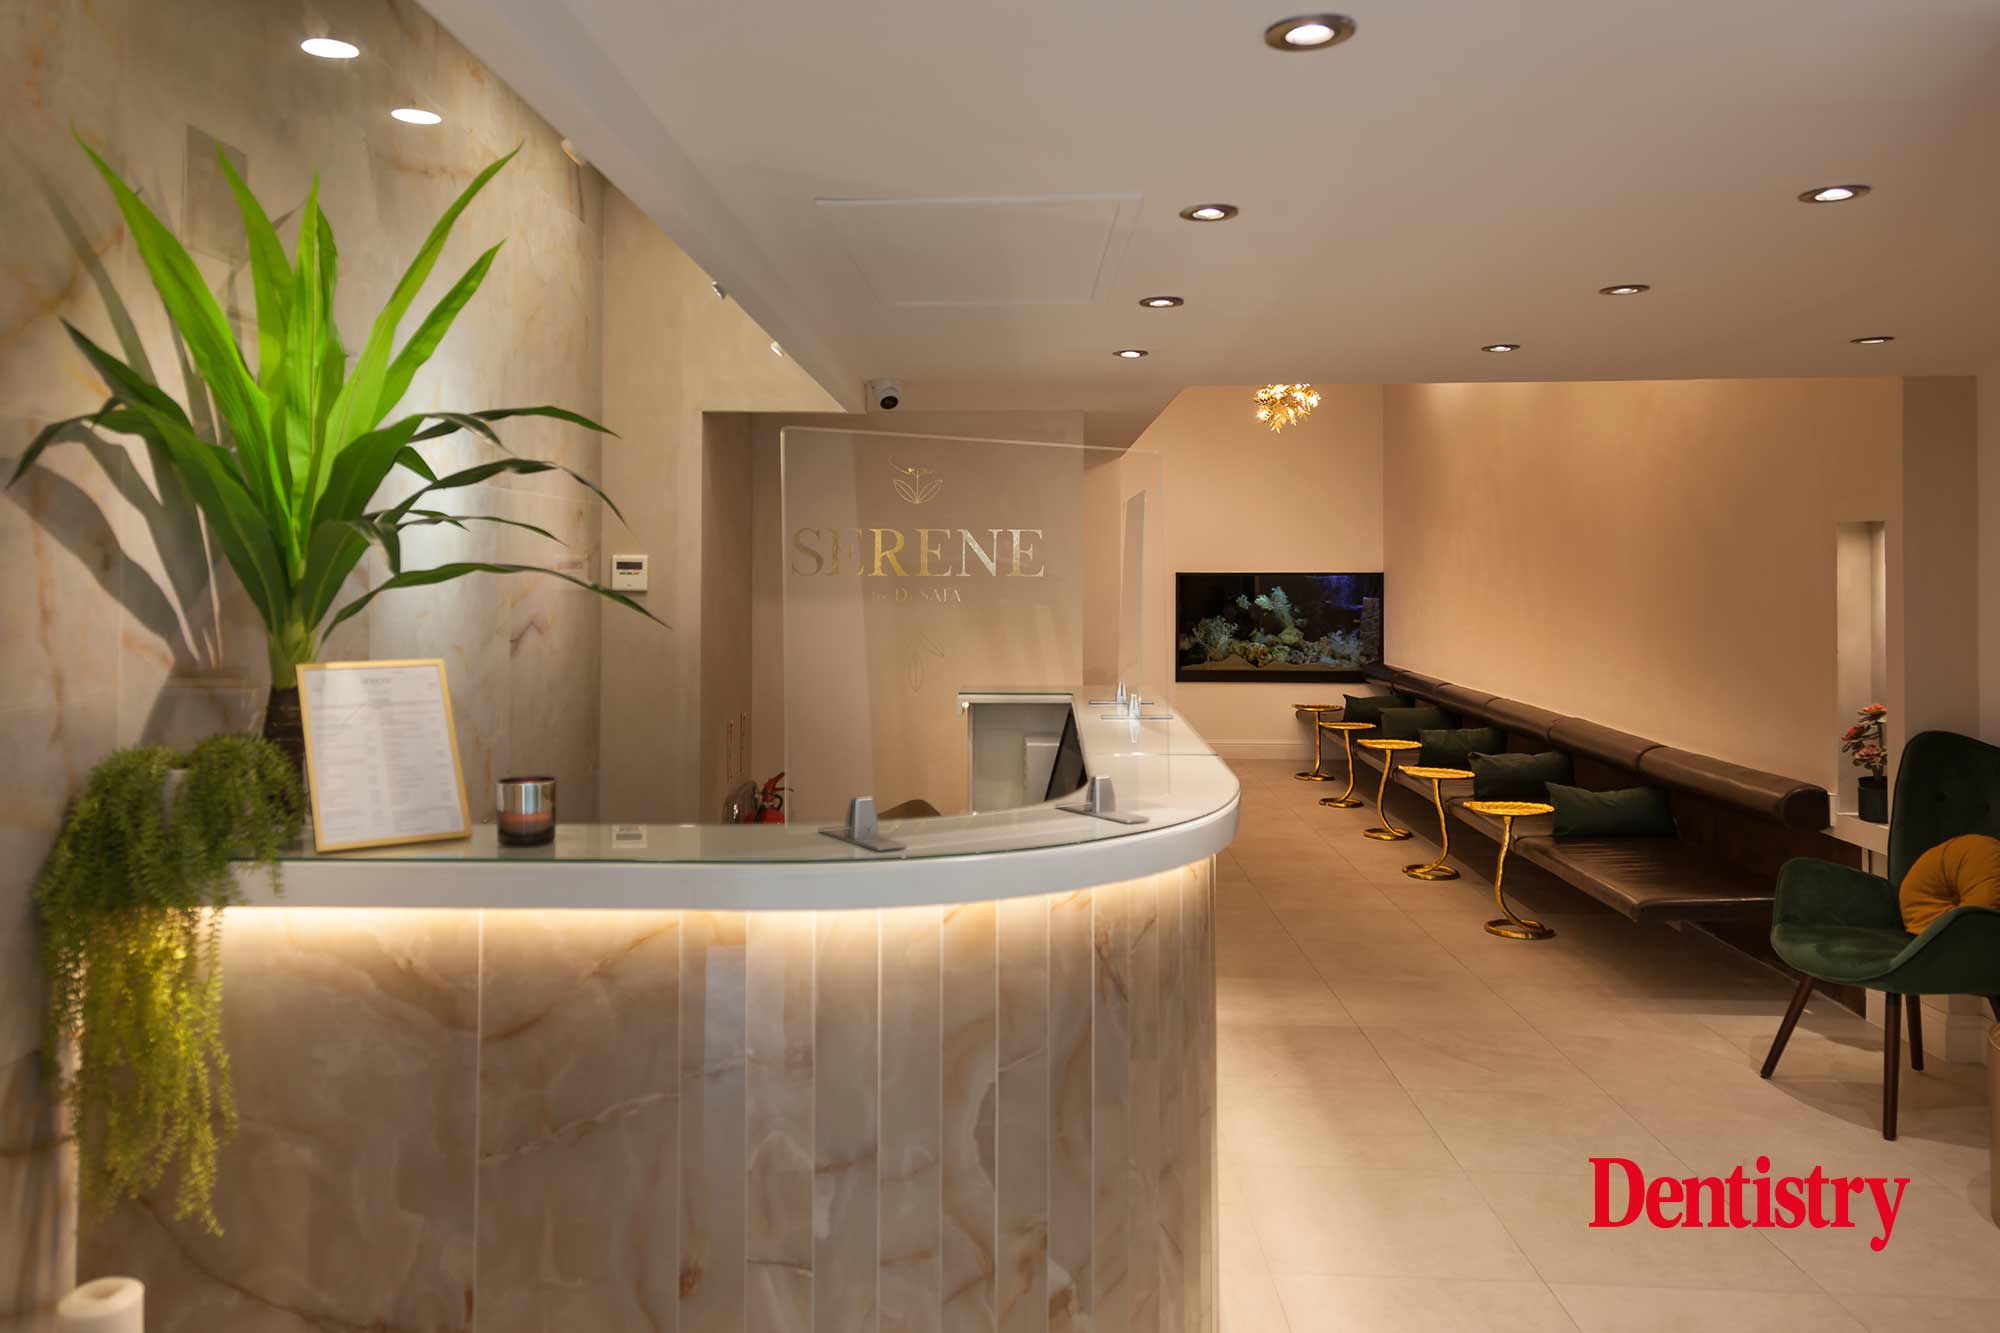 Dr Safa Al-Naher discusses the emerging popularity of dental spas and why she believes a holistic approach to dental care is essential for patient experience.